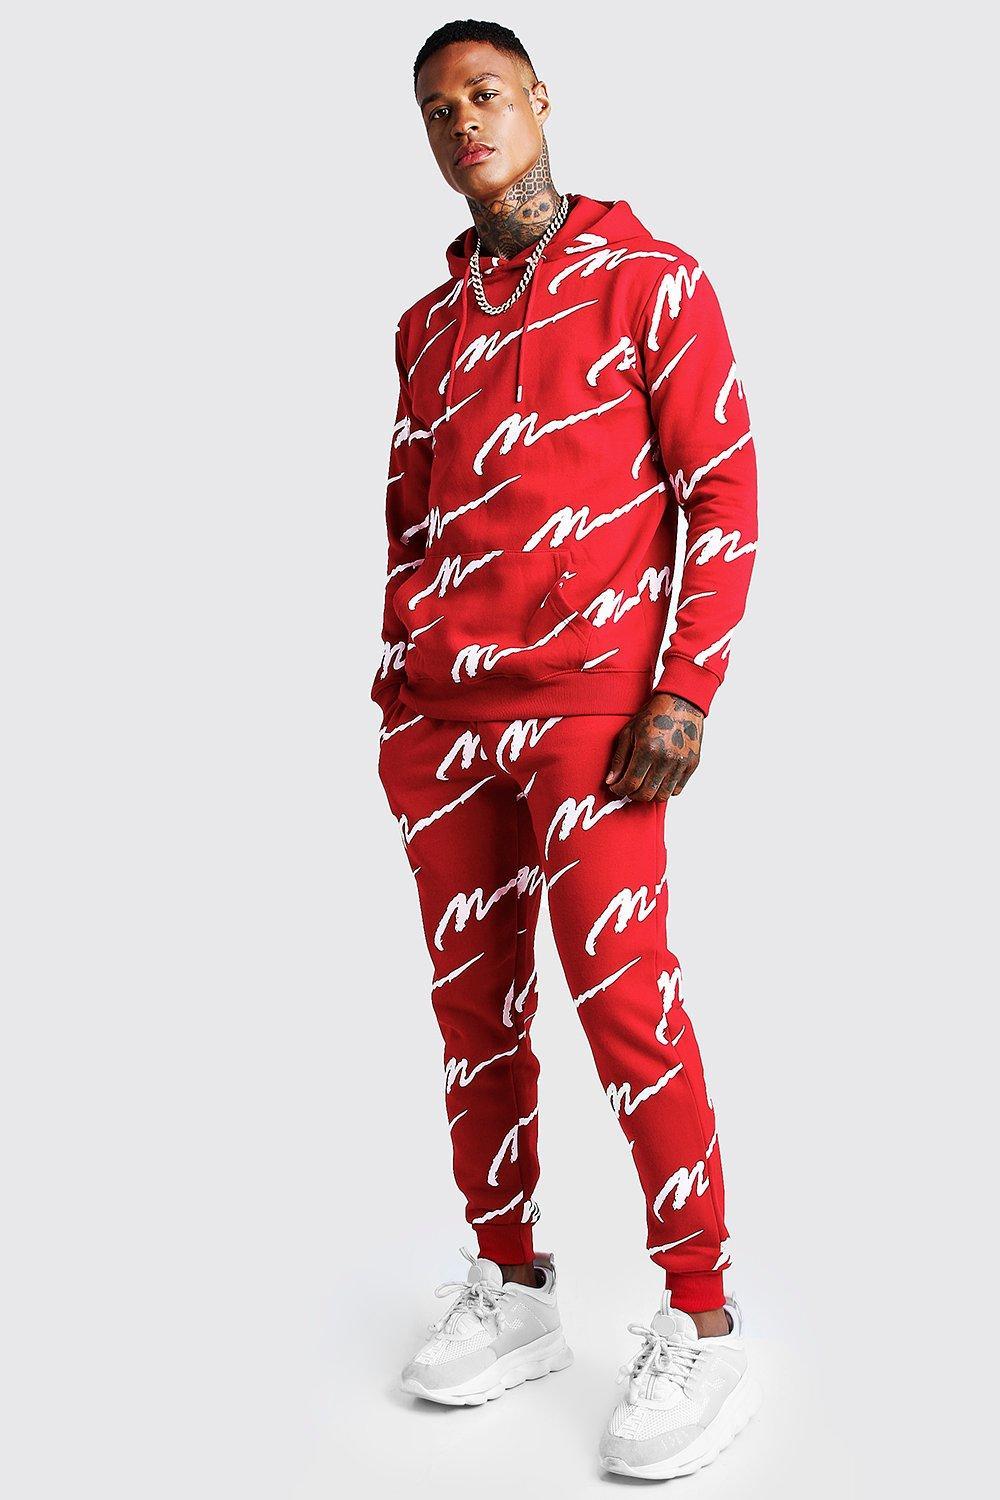 BoohooMAN Cotton All Over Man Printed Hooded Tracksuit in Red for 